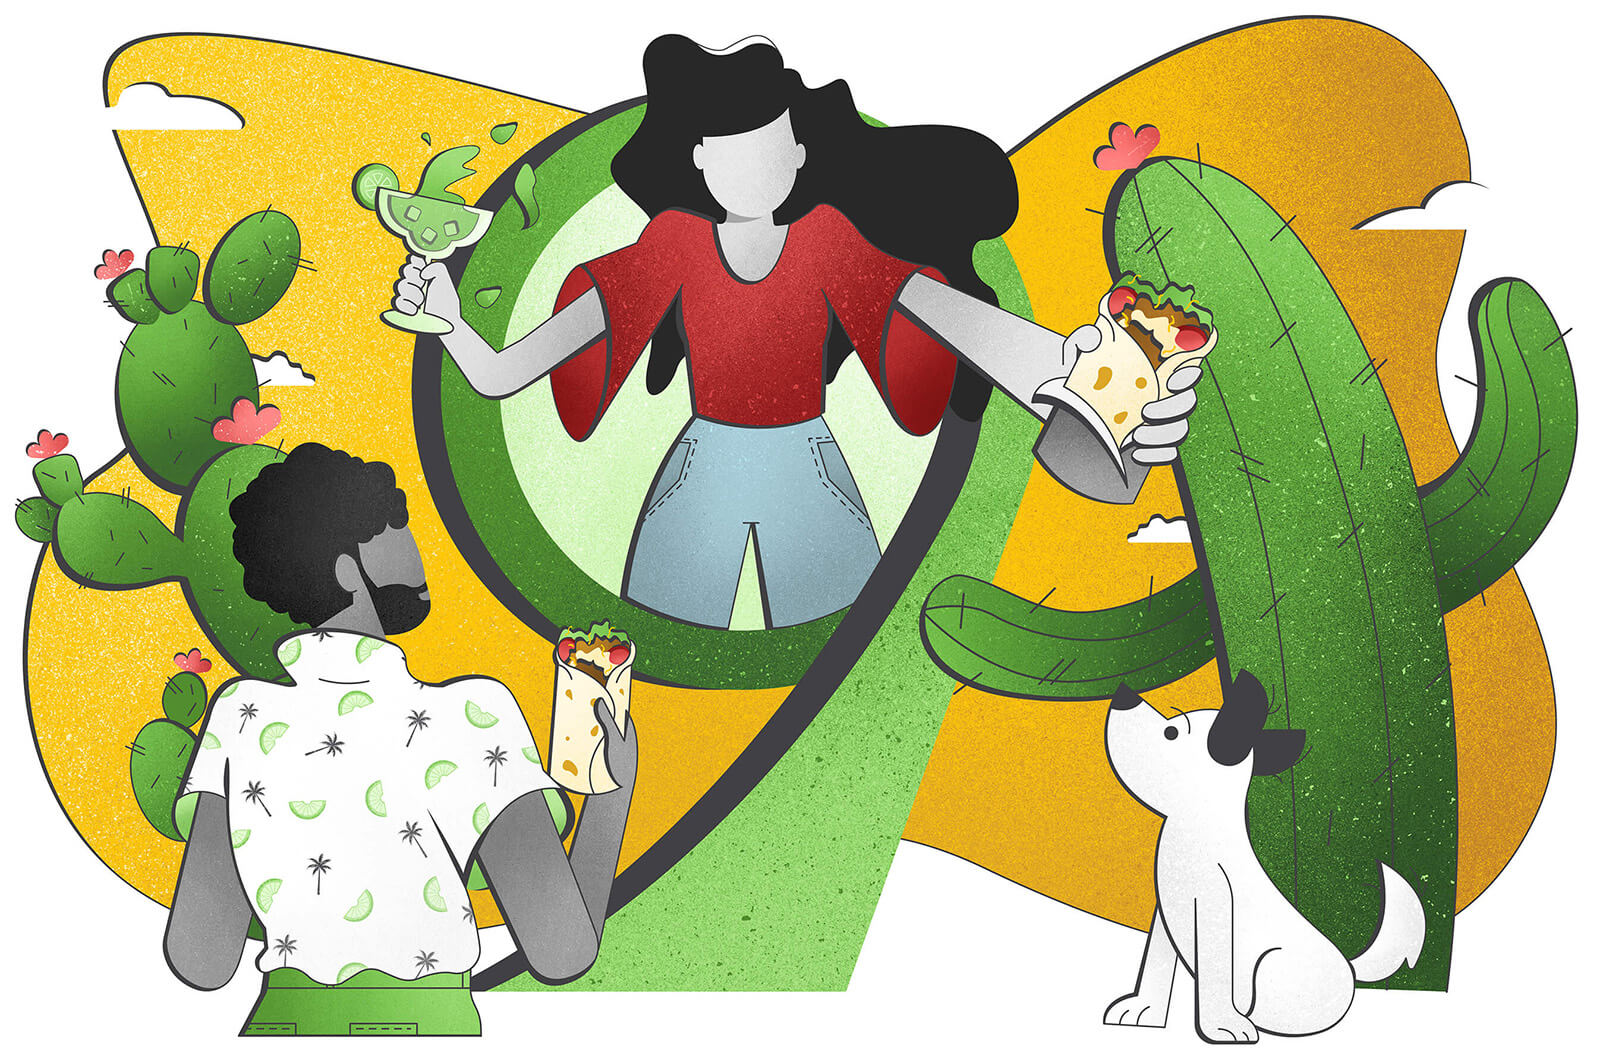 A person with long black hair and a loose red shirt stands in the middle a large, green number 9. They are festively holding a burrito and a margarita. Around them is a yellow sky with clouds and large flowering cacti, as well as a dog and a man (also holding a burrito) looking on.